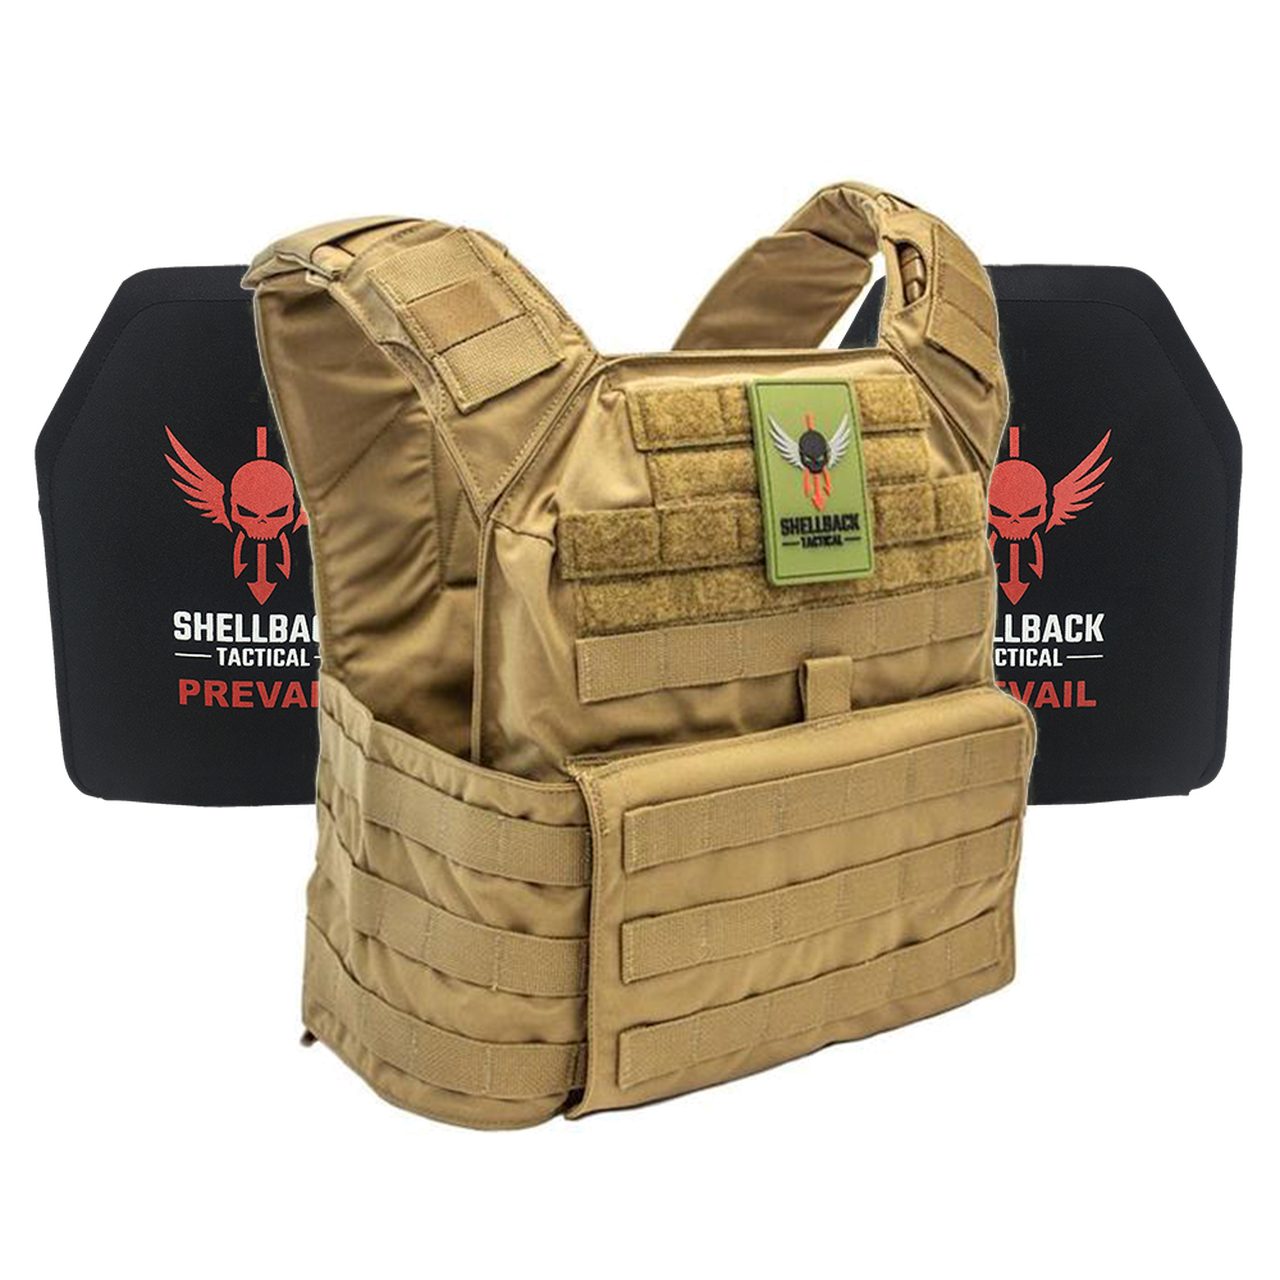 A Shellback Tactical Banshee Active Shooter Kit with Level IV Model 1155 Armor Plates plate carrier with a red and black logo.